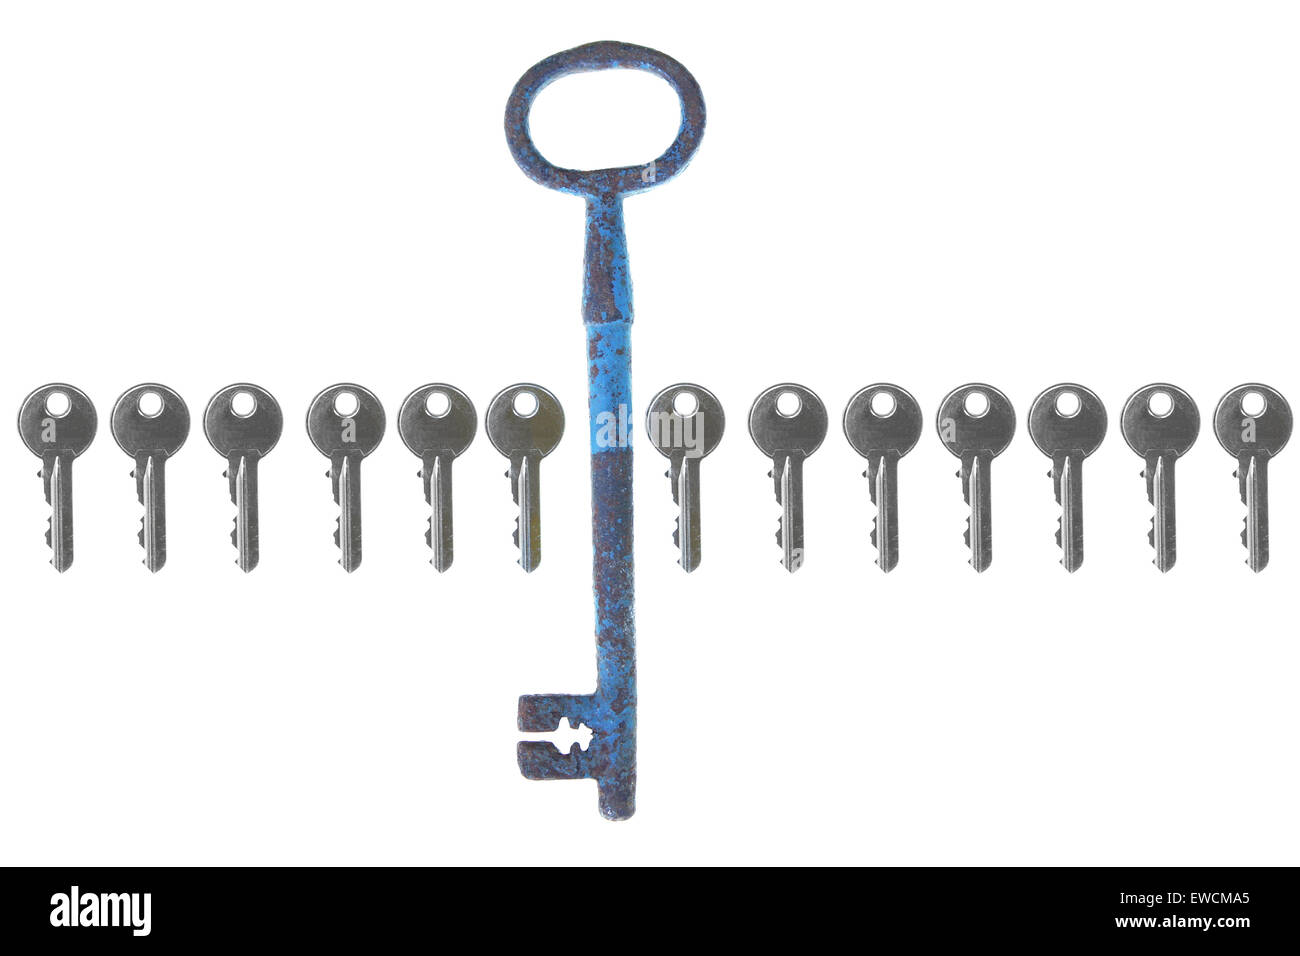 old big vintage forged key standing out from the crowd with small modern stock Stock Photo